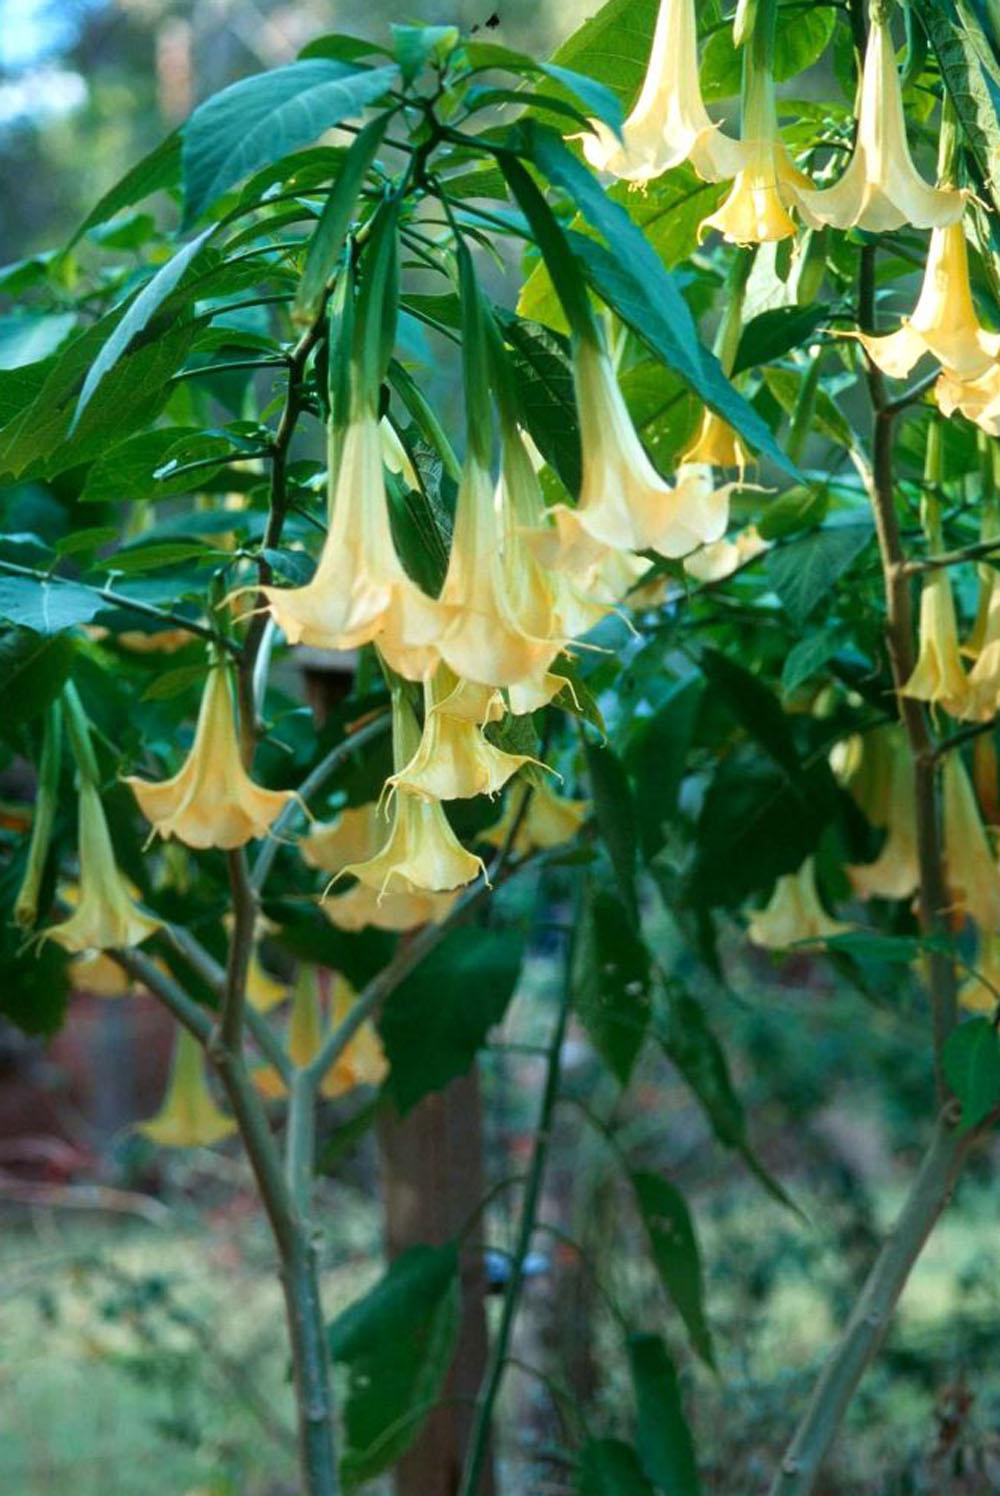 Known botanically as Brugmansia, Angel's Trumpets come from Ecuador, but they couldn't look more at home in Mississippi. The most beautiful of Angel's Trumpets reach 12 to 18 inches in length and make a statement in the landscape. Combine them with large bananas for a tropical appeal, or try them with Purple Hearts or red coleus like Burgundy Sun, New Orleans Red or Plum Parfait.